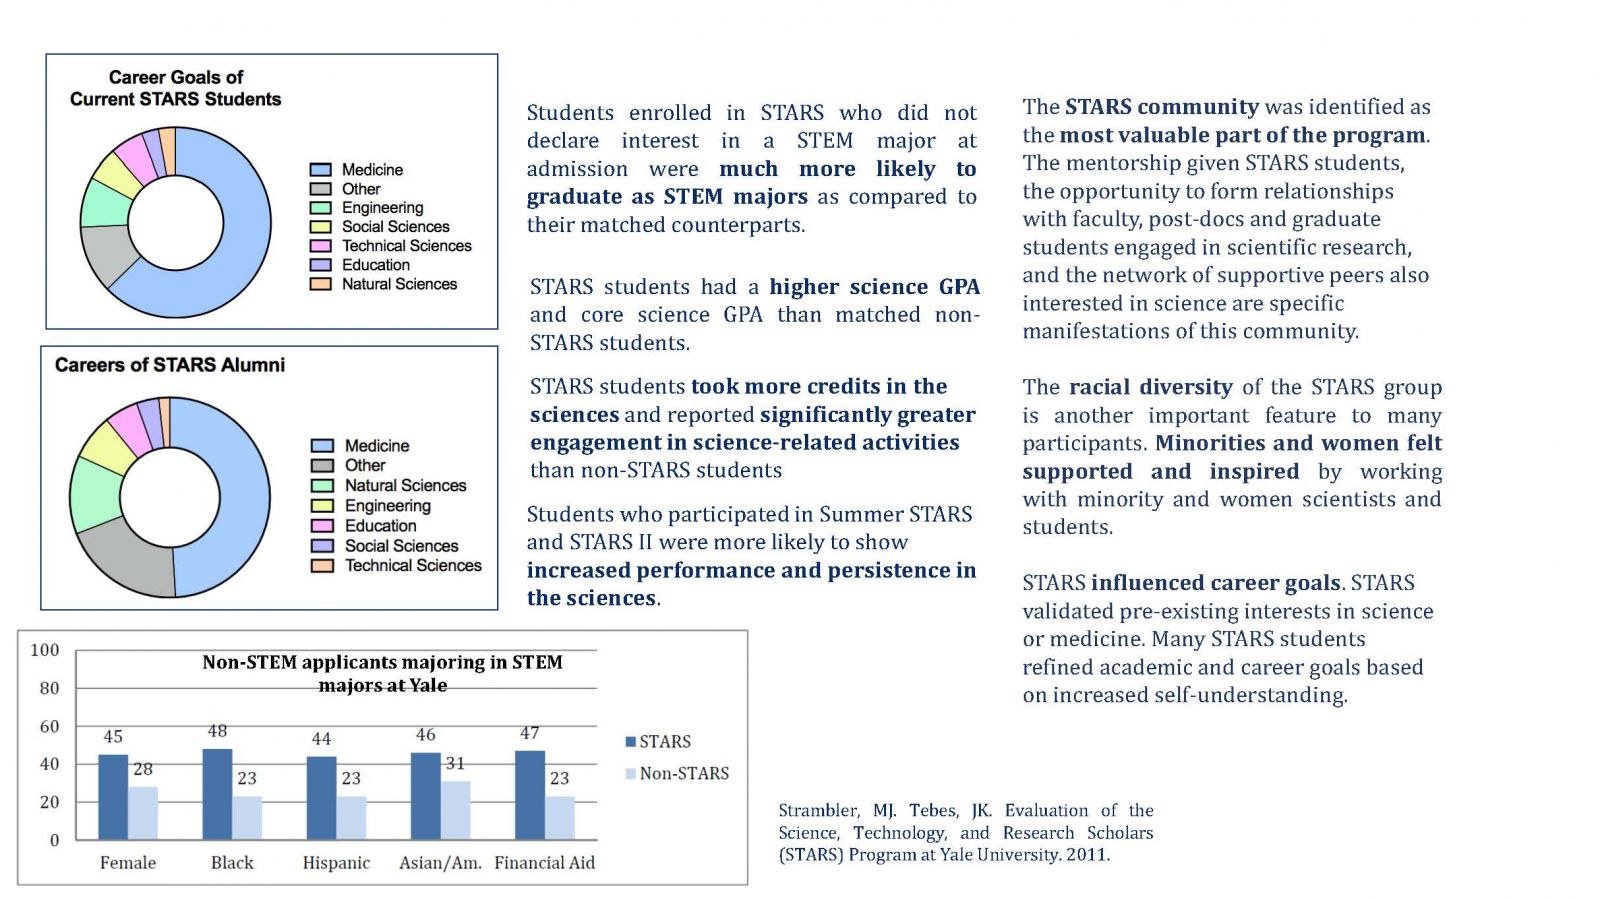 Students enrolled in STARS who did not dclare interest in a STEM major at admission were much more likely to graduate as STEM majors as compared to their matched counterpats.  STARS students had a higher science GPA and core science GPA than matched non-STARS students.  STARS studetns took more credits in the sciences and reported significantly greater engagement in science-related activities than non-STARS students.  Students who participated in Summer STARS and STARS 2 were more likely to show increased performance and persistence in the sciences.  The STARS community was identified as the most valuable part of the program. The mentorship given STARS students, the opportunity to form relationships with faculty, post-docs and graduate students engaged in scientfic research, and the network of supportive peers also interested in science are specific manisfestations of this community.  The racial diversity of the STARS group is another important feature to many participants. Minorities and women felt supported and inspired by working with minority and women scientists and students.  STARS influenced career goals. STARS validated pre-existing interests in science or medicine. Many STARS students refined academic and career goals based on increased self-understanding.